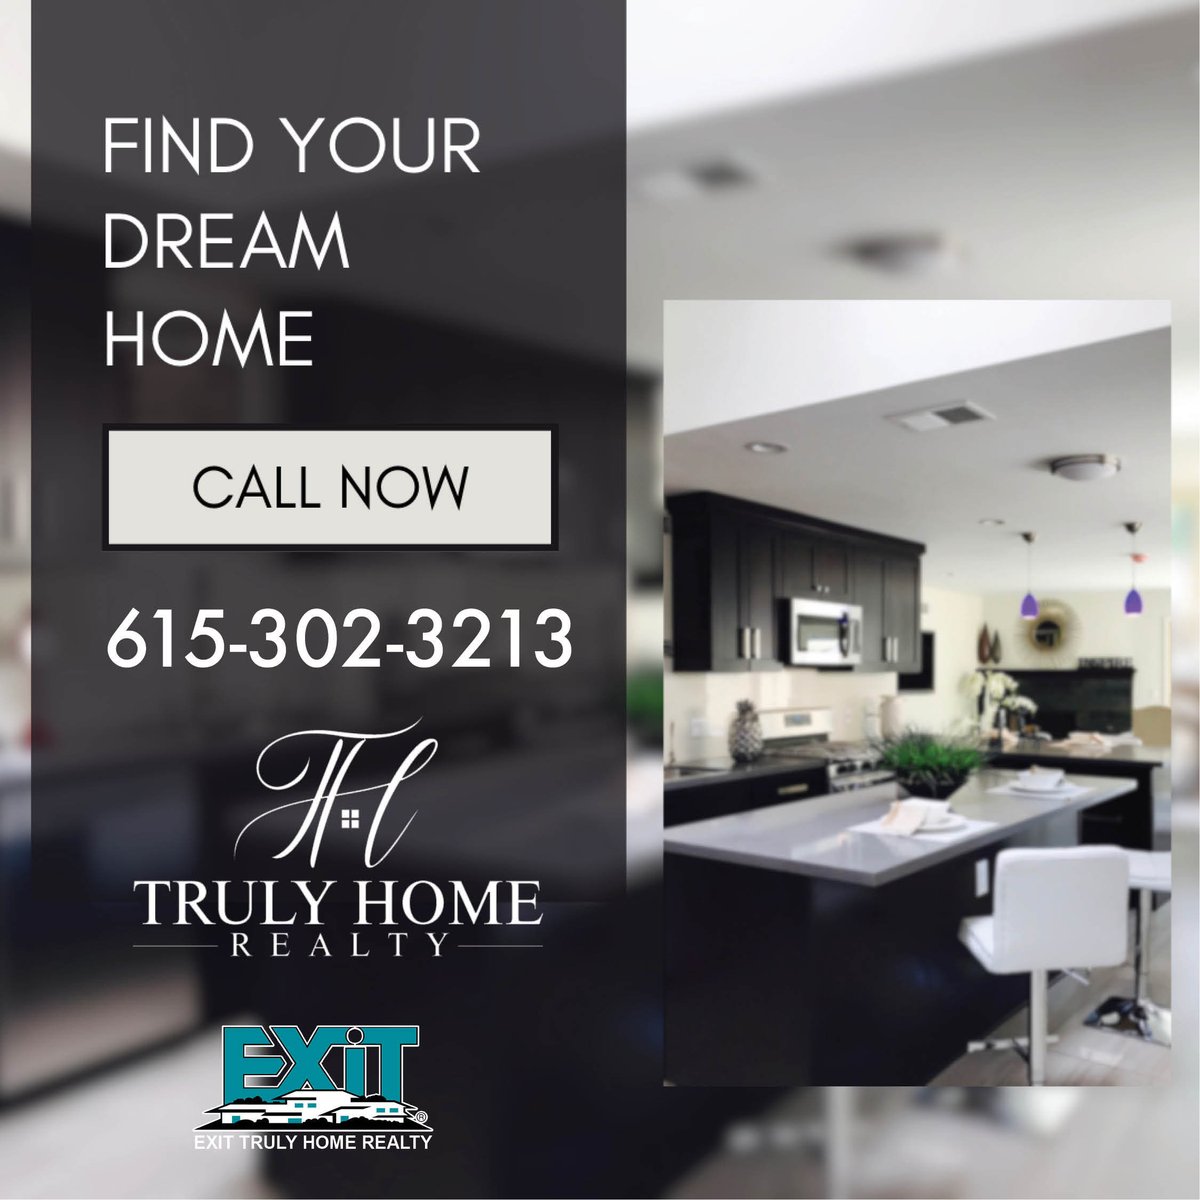 Find your dream home!
Call EXIT Truly Home Realty today - We are ready to get to work for you.

#TennesseeRealtor #EXITTrulyHomeRealty #realestate #realtor #nashvilletn #nashvegas #exit #exitrealty #homesforsale #sellmyhome #househunting #dreamhome #newhome #realestateagent...